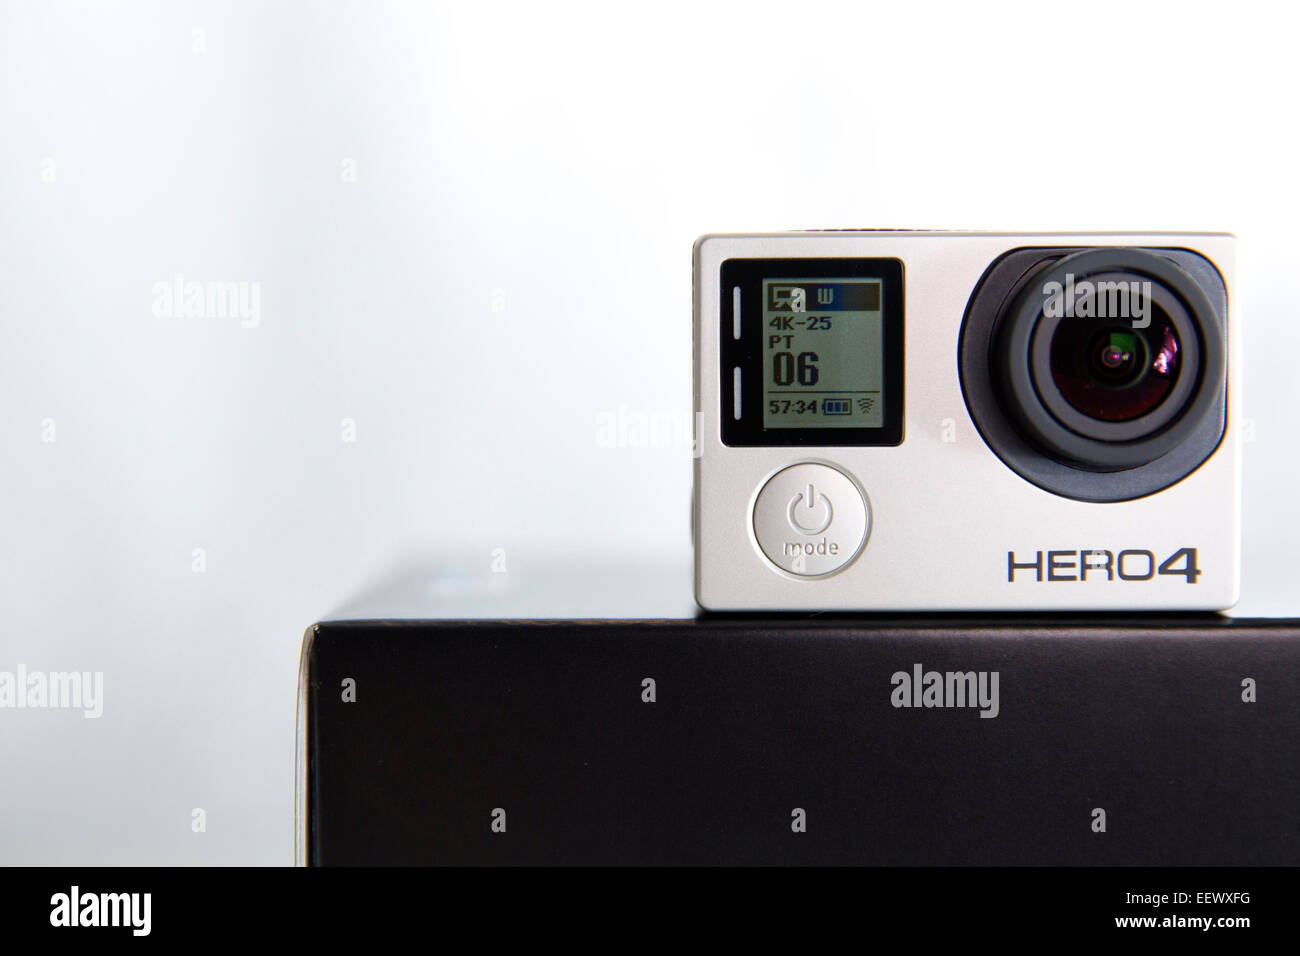 A GoPro Hero 4 Black edition is pictured in a studio on a white background. Stock Photo